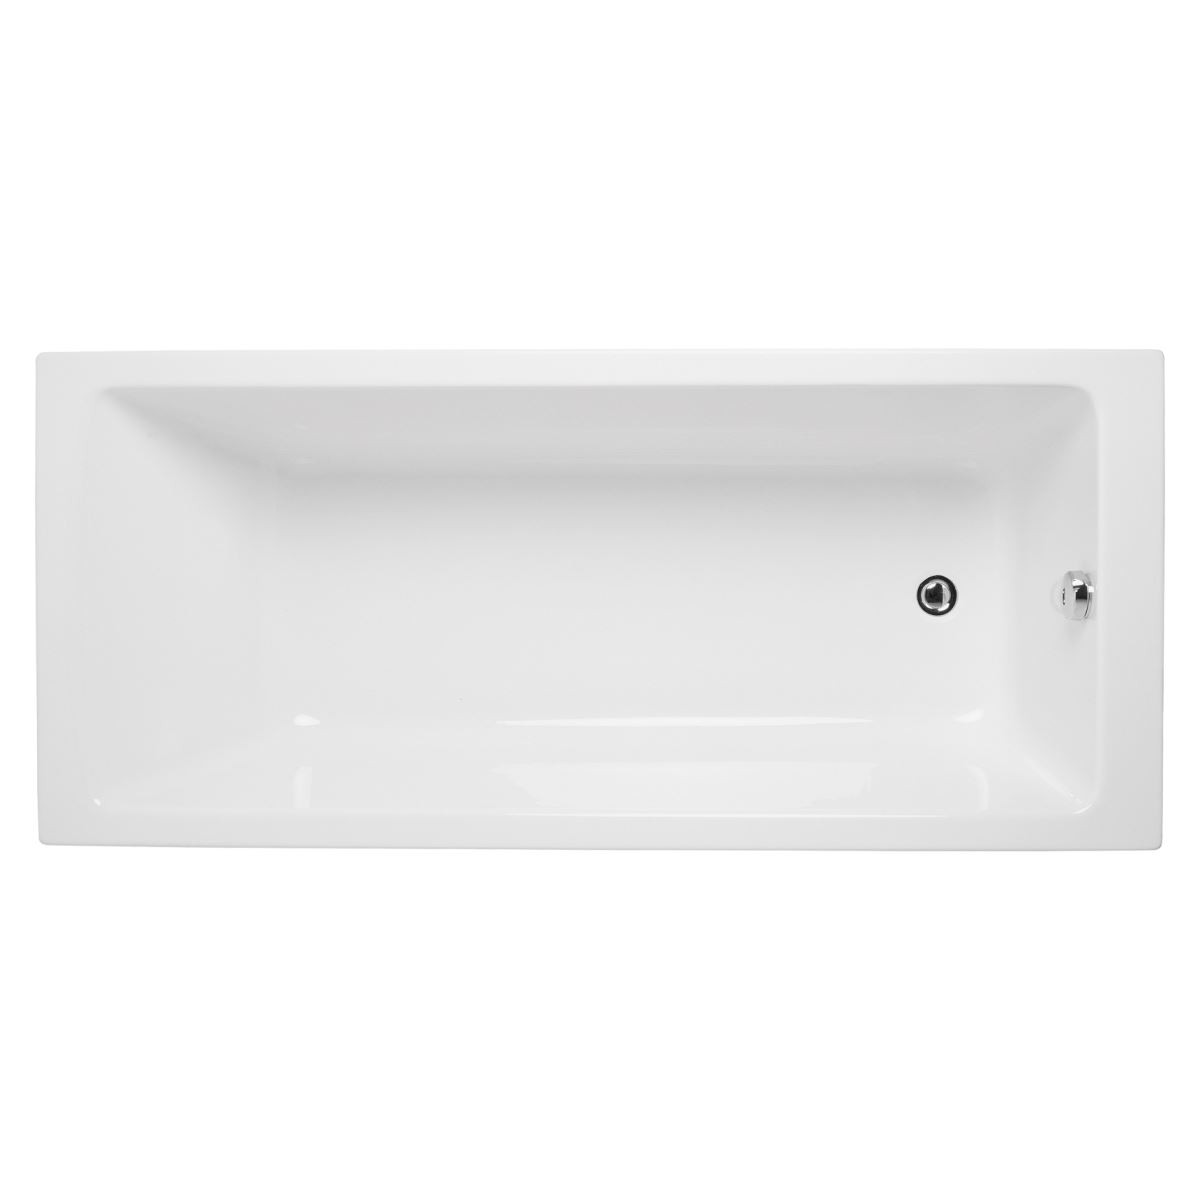 VitrA Neon Single Ended Bath 1500 x 700mm [52510001000] [BATH PANELS NOT INCLUDED]